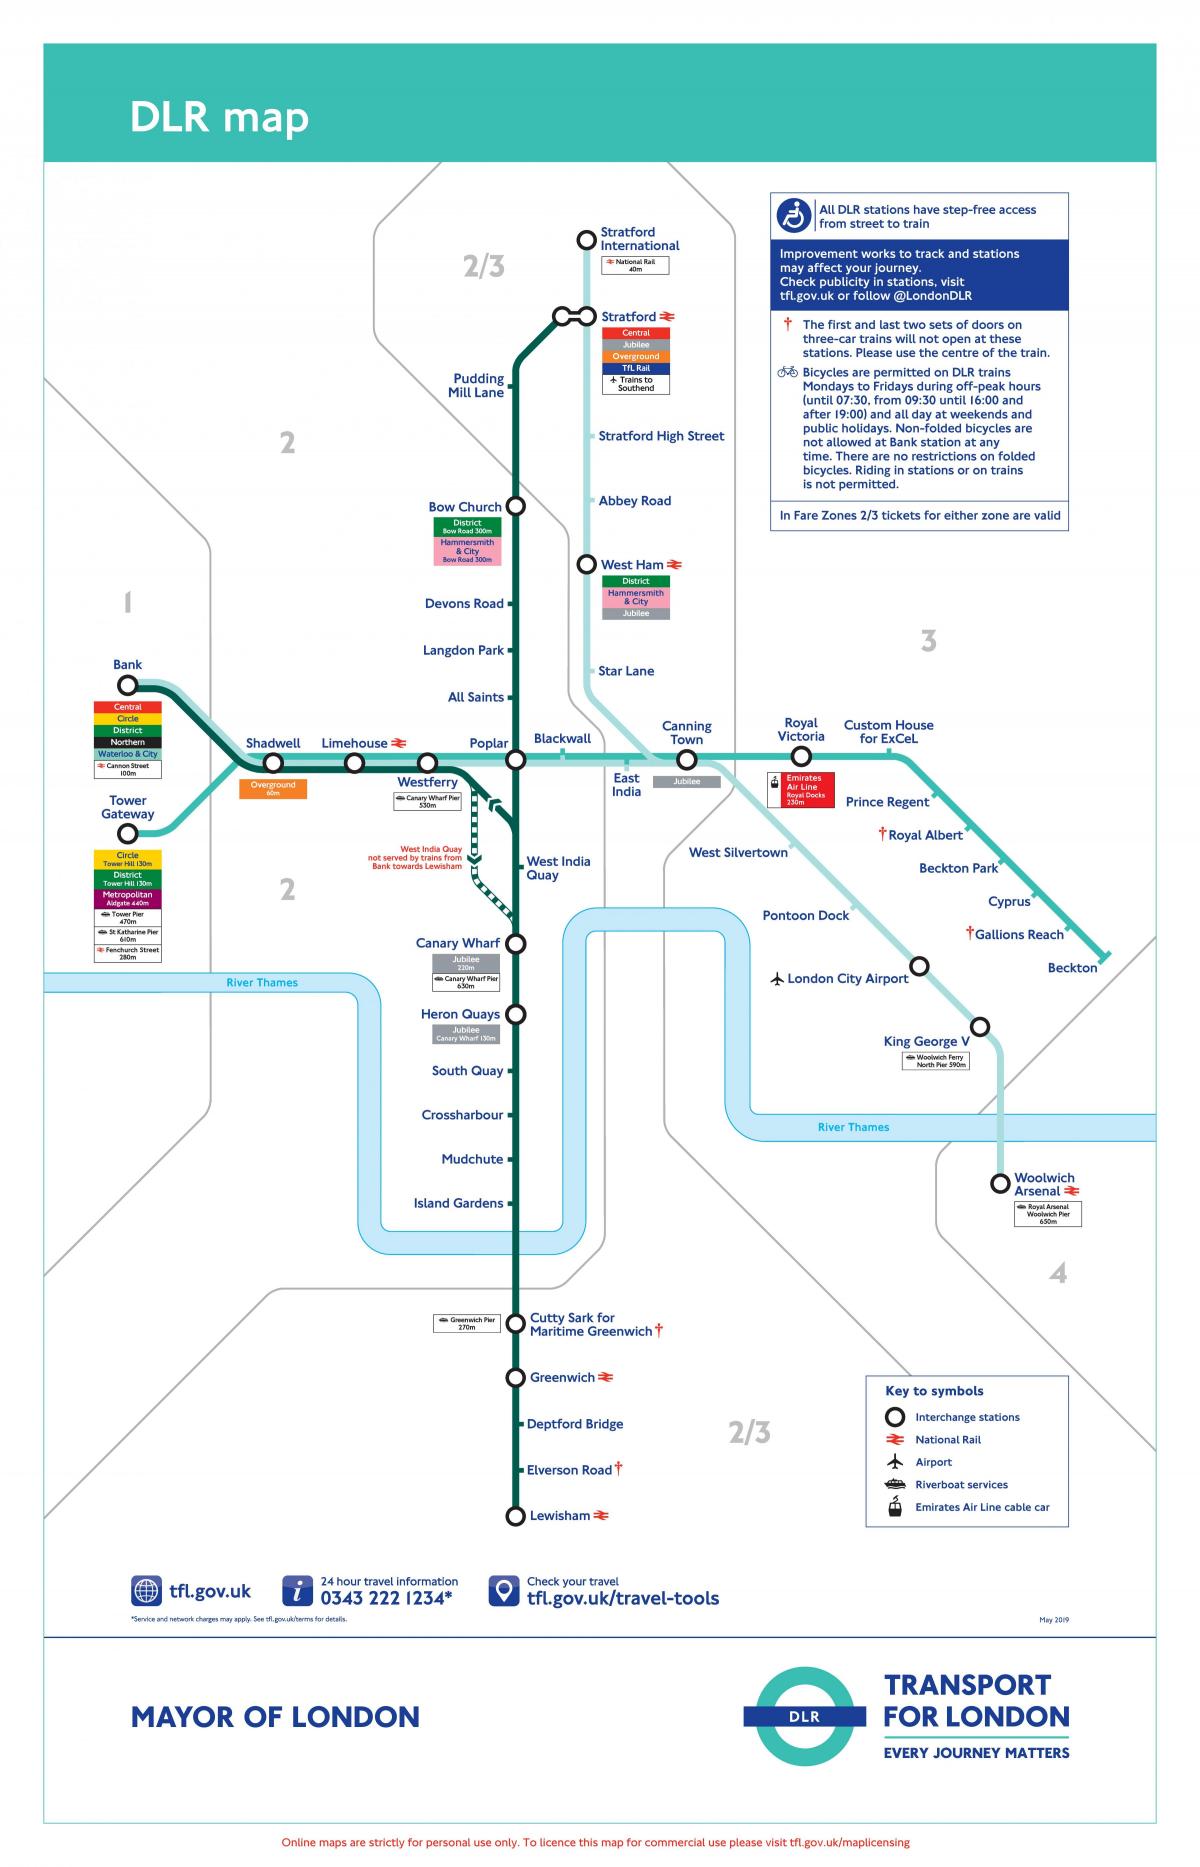 dlr map of London